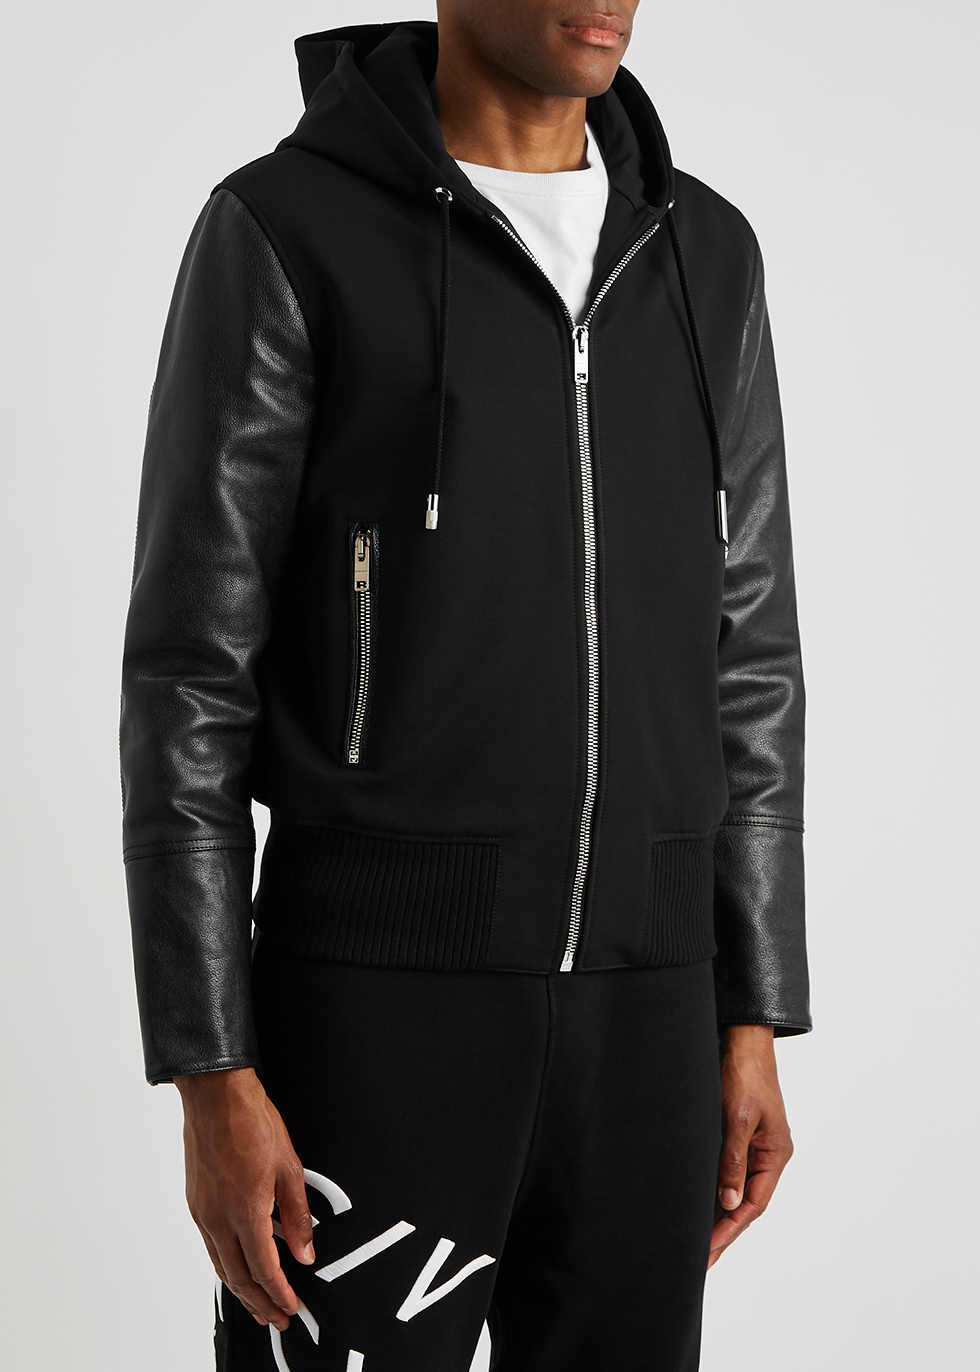 Givenchy Black hooded leather and jersey jacket - Harvey Nichols